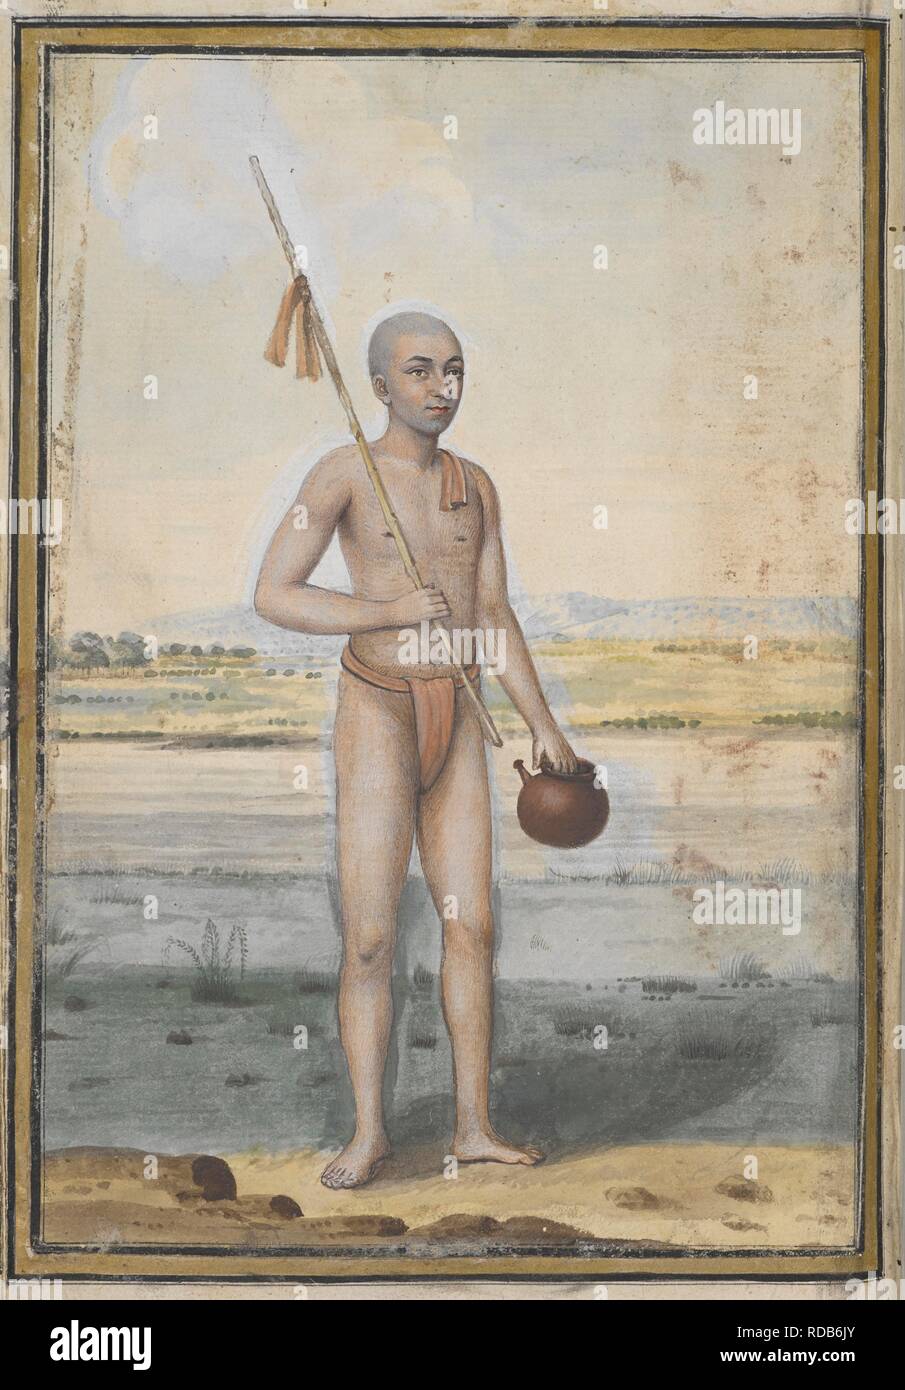 A member of the Dandi sect. Members of this sect used to shave all their body hair. They covered their bodies with ash and carried a pot and a stick at all times. A painting from a nineteenth century manuscript of Fuqara'-i Hind, a text describing the different Hindu religious sects. Fuqara'-i Hind. early 19th century. A member of the Dandi sect. Members of this sect used to shave all their body hair. They covered their bodies with ash and carried a pot and a stick at all times. A painting from a nineteenth century manuscript of Fuqara'-i Hind, a text describing the different Hindu religious s Stock Photo